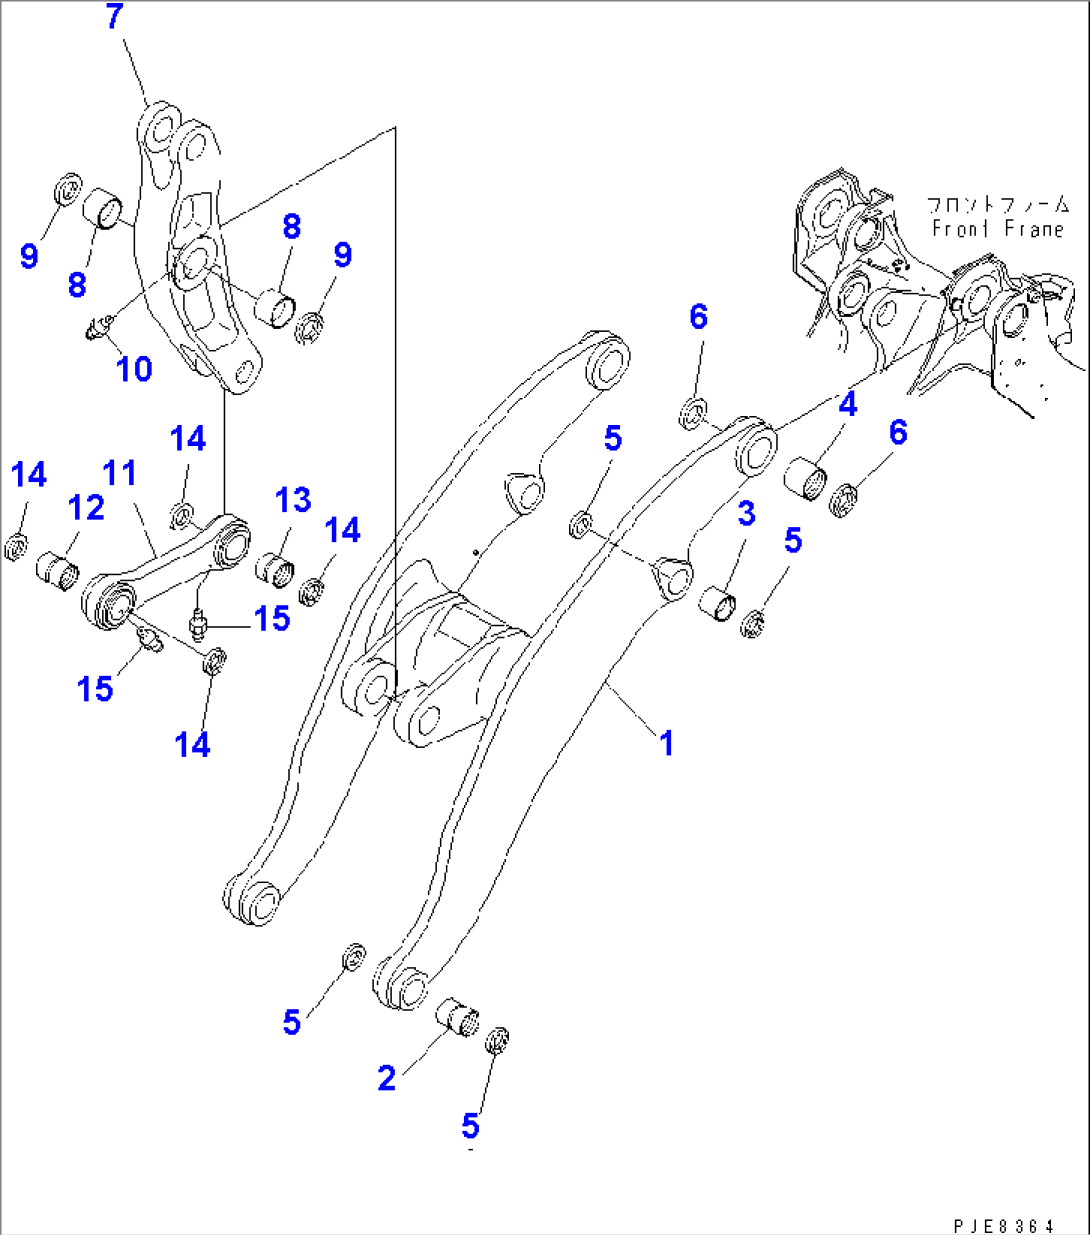 LIFT ARM AND BELLCRANK (ACTIVE WORKING)(#51075-)